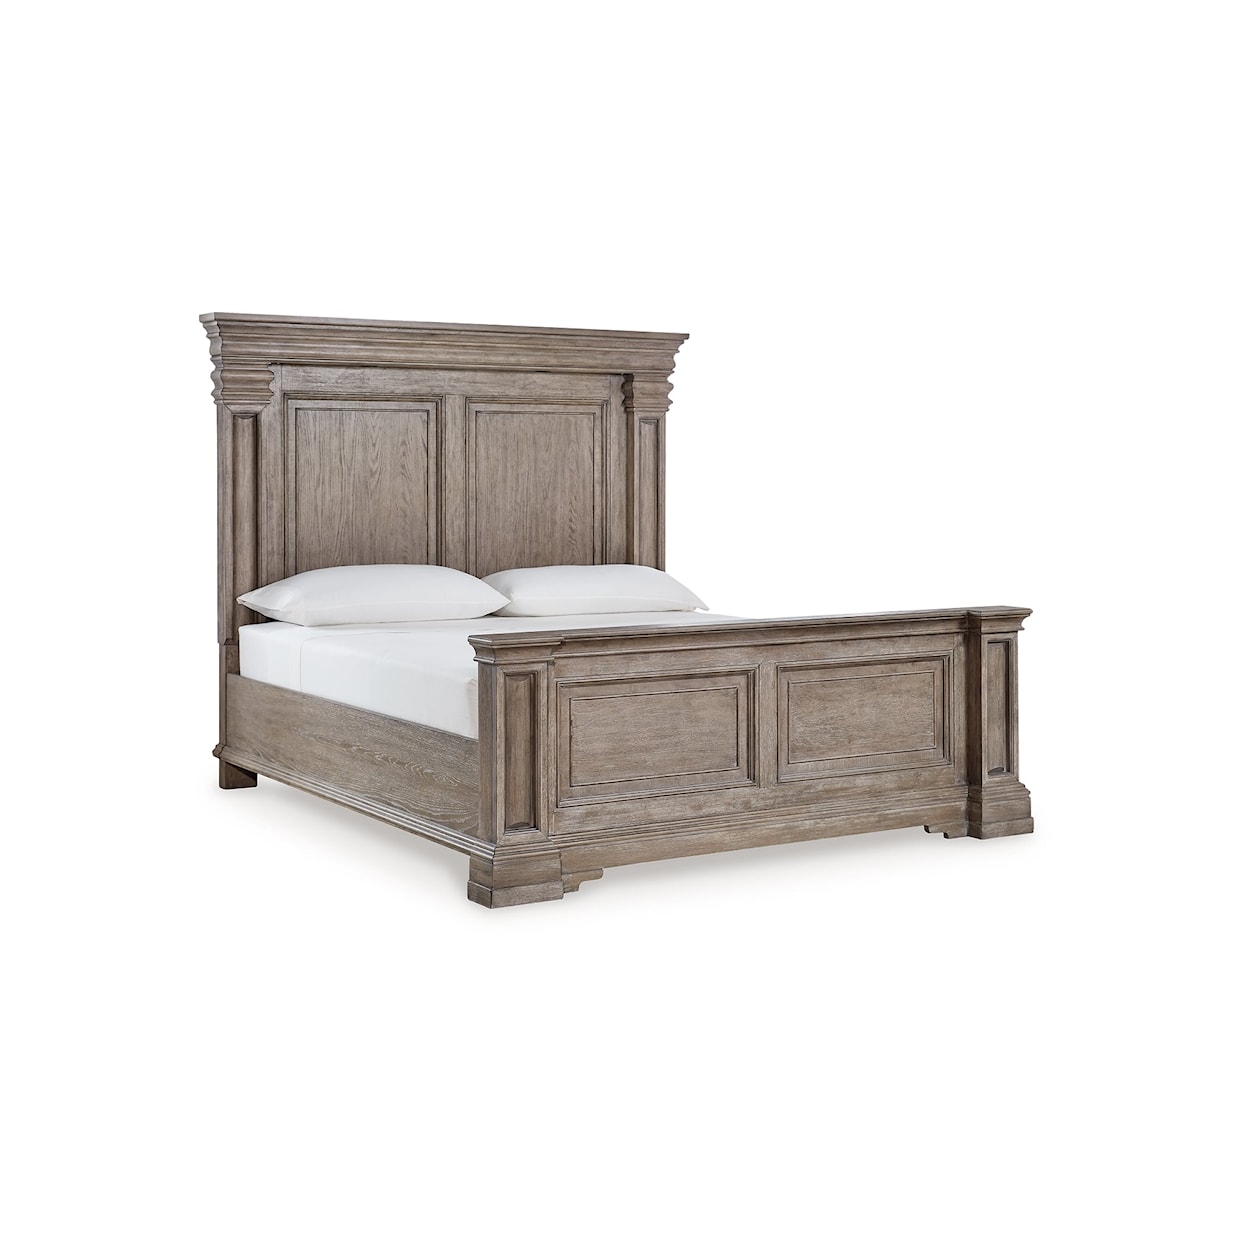 Signature Design by Ashley Blairhurst Queen Panel Bed